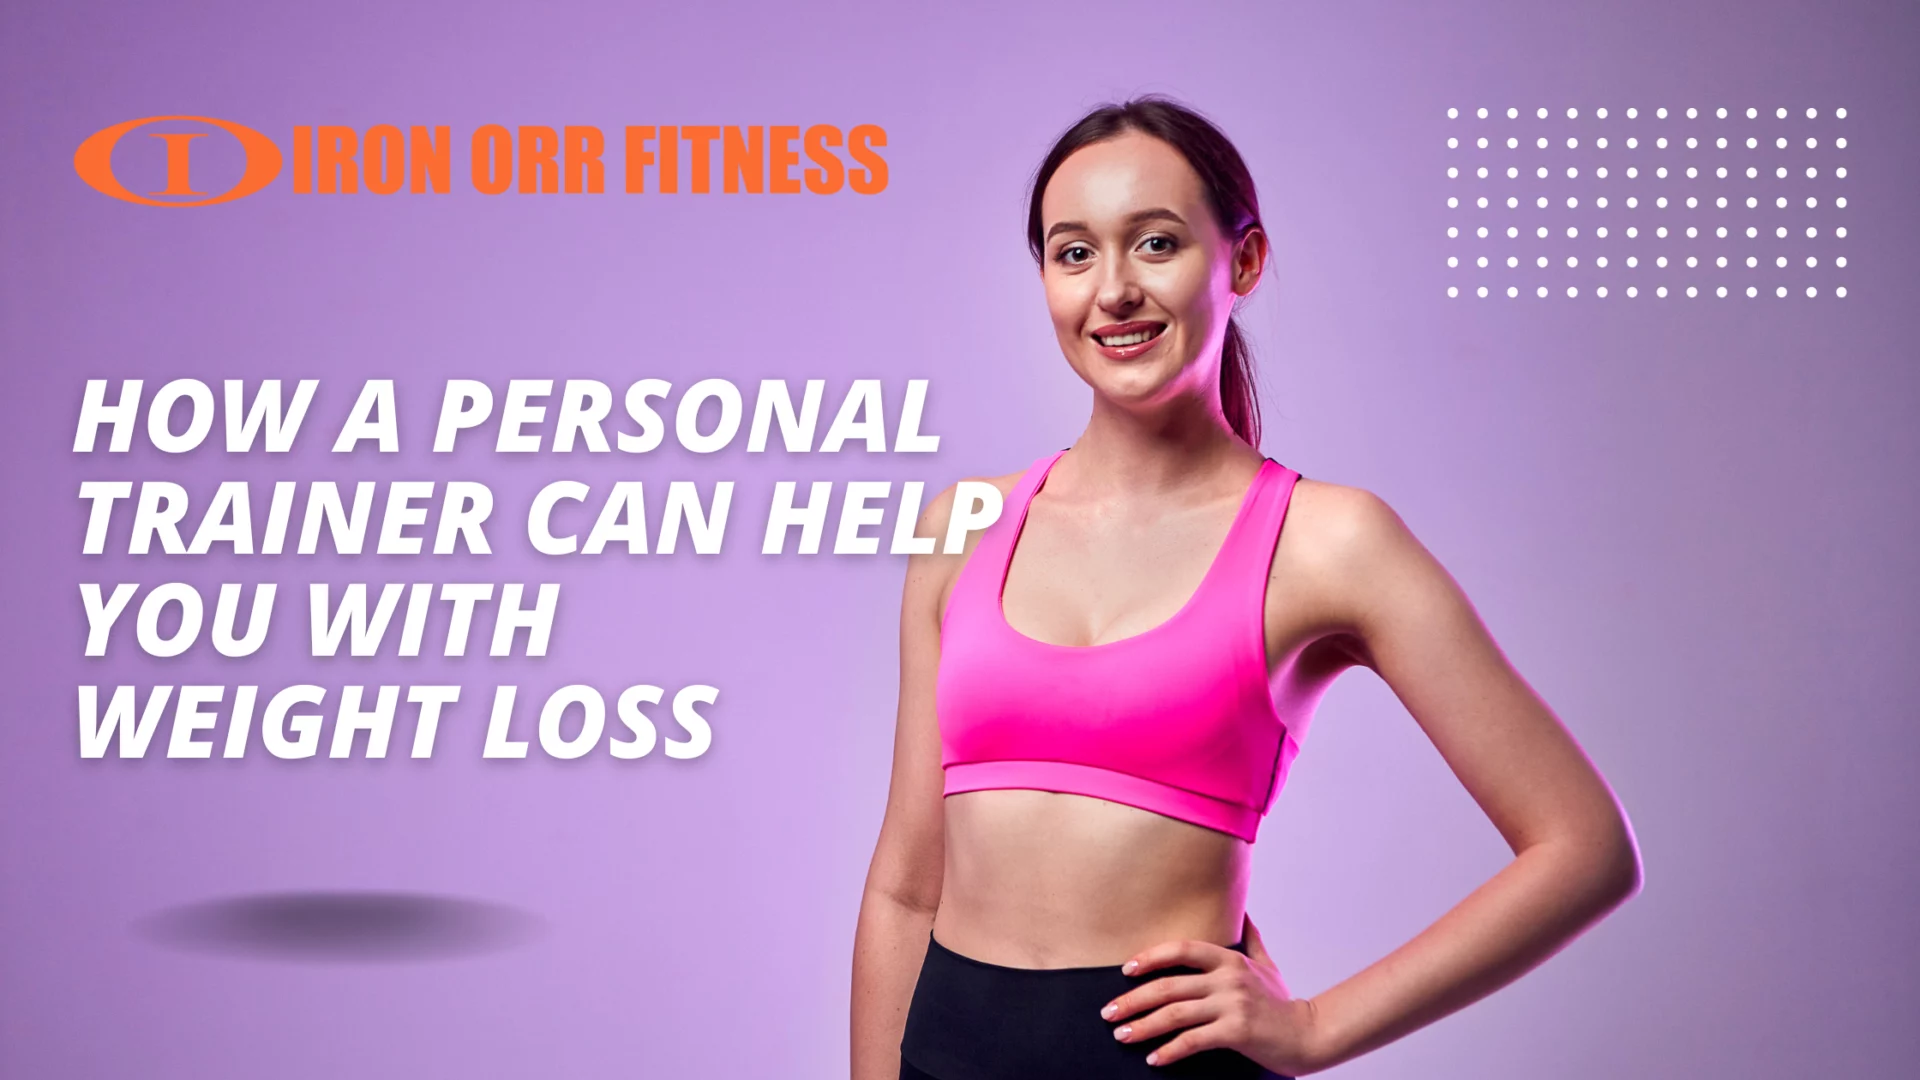 HOW A PERSONAL TRAINER CAN HELP YOU WITH WEIGHT LOSS